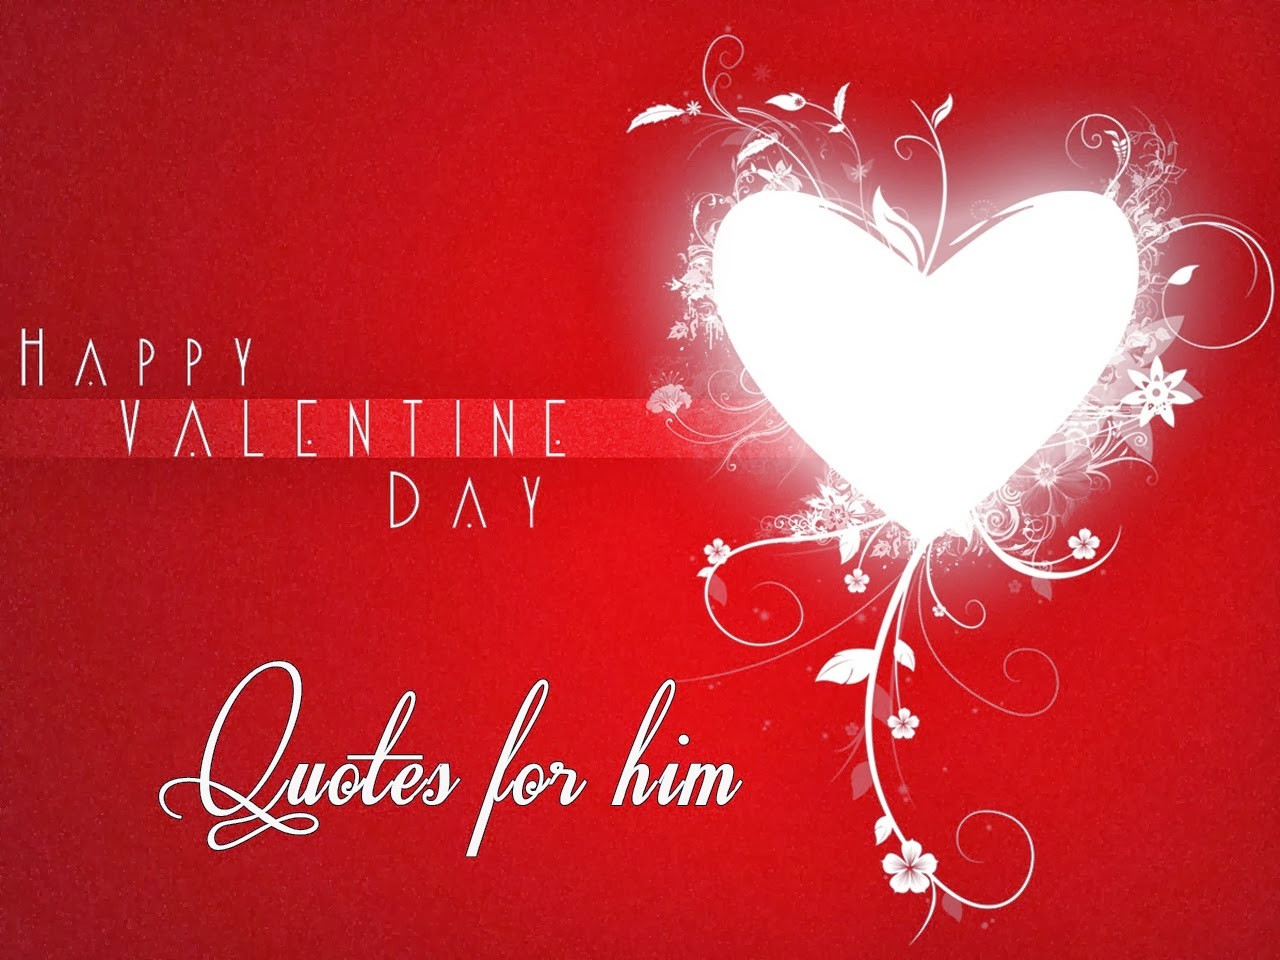 Happy Valentines Day Quotes For Him
 Valentines Day Love Quotes For Him QuotesGram